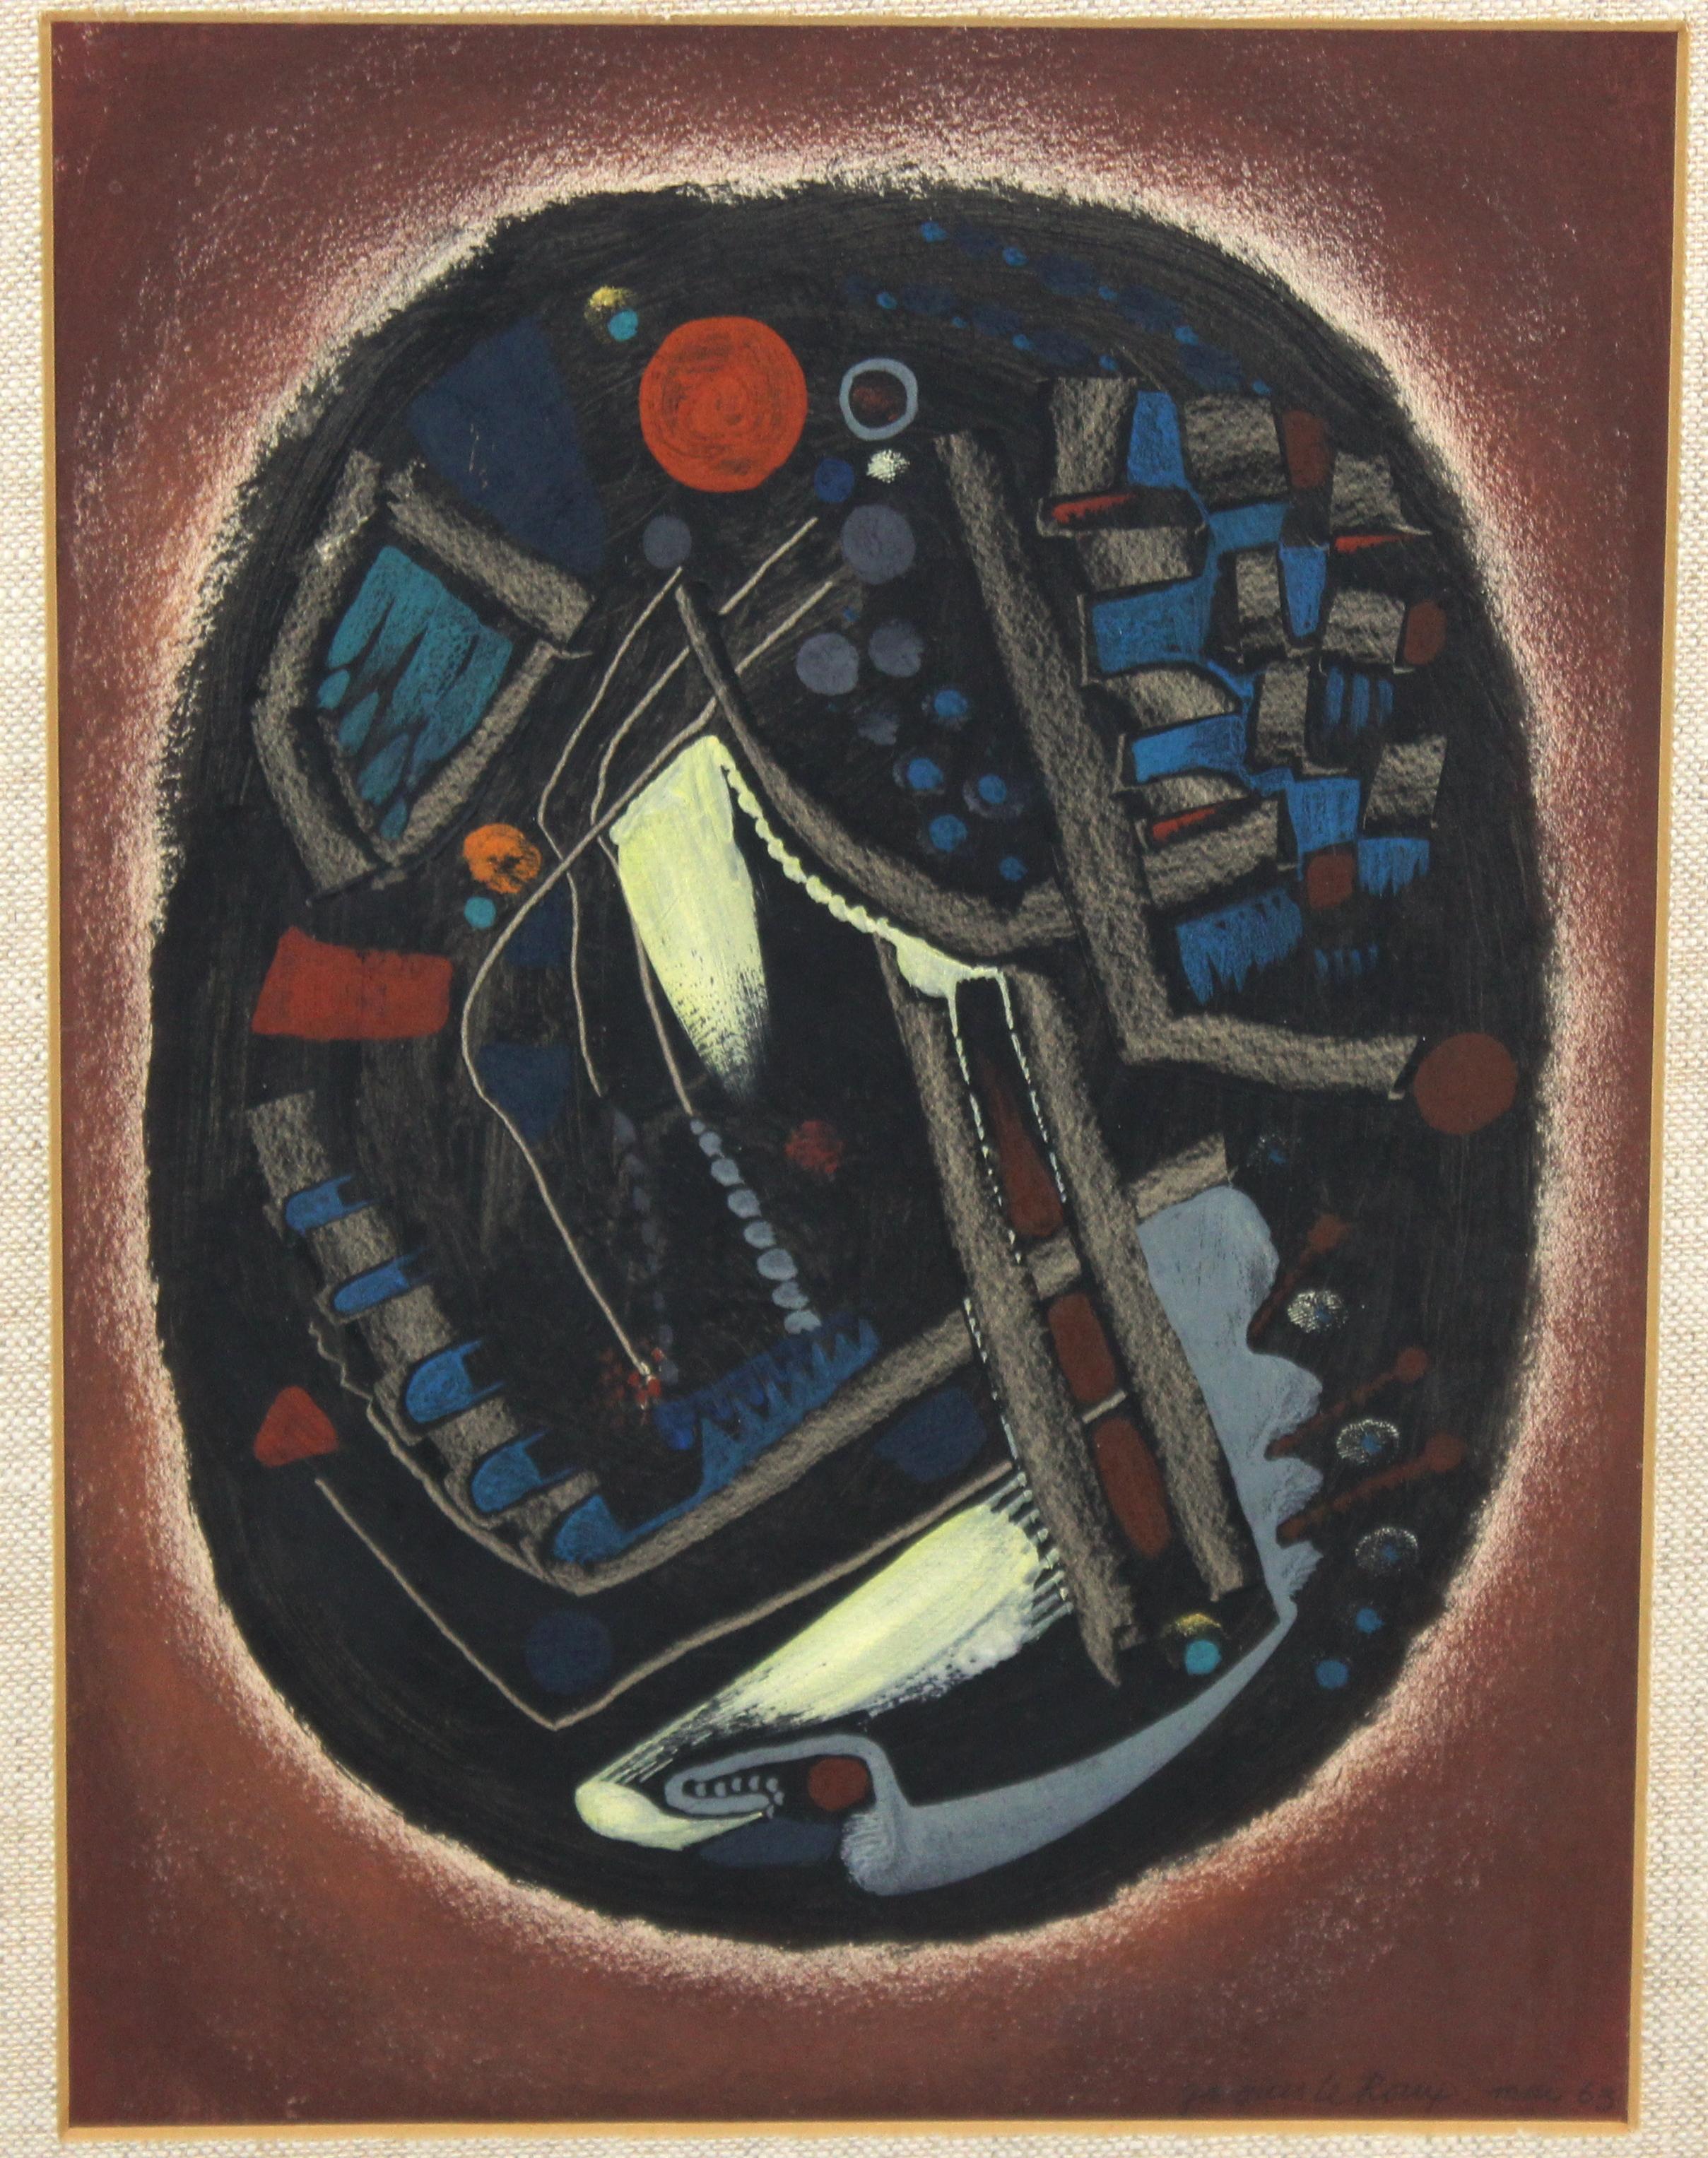 French abstract modernist mixed-media painting by Jacques Le Roux (French, 1923-2010). The piece is signed and dated 1963 in the lower right corner and framed in the original silver leaf frame. Created in egg tempera and pastel, the piece depicts